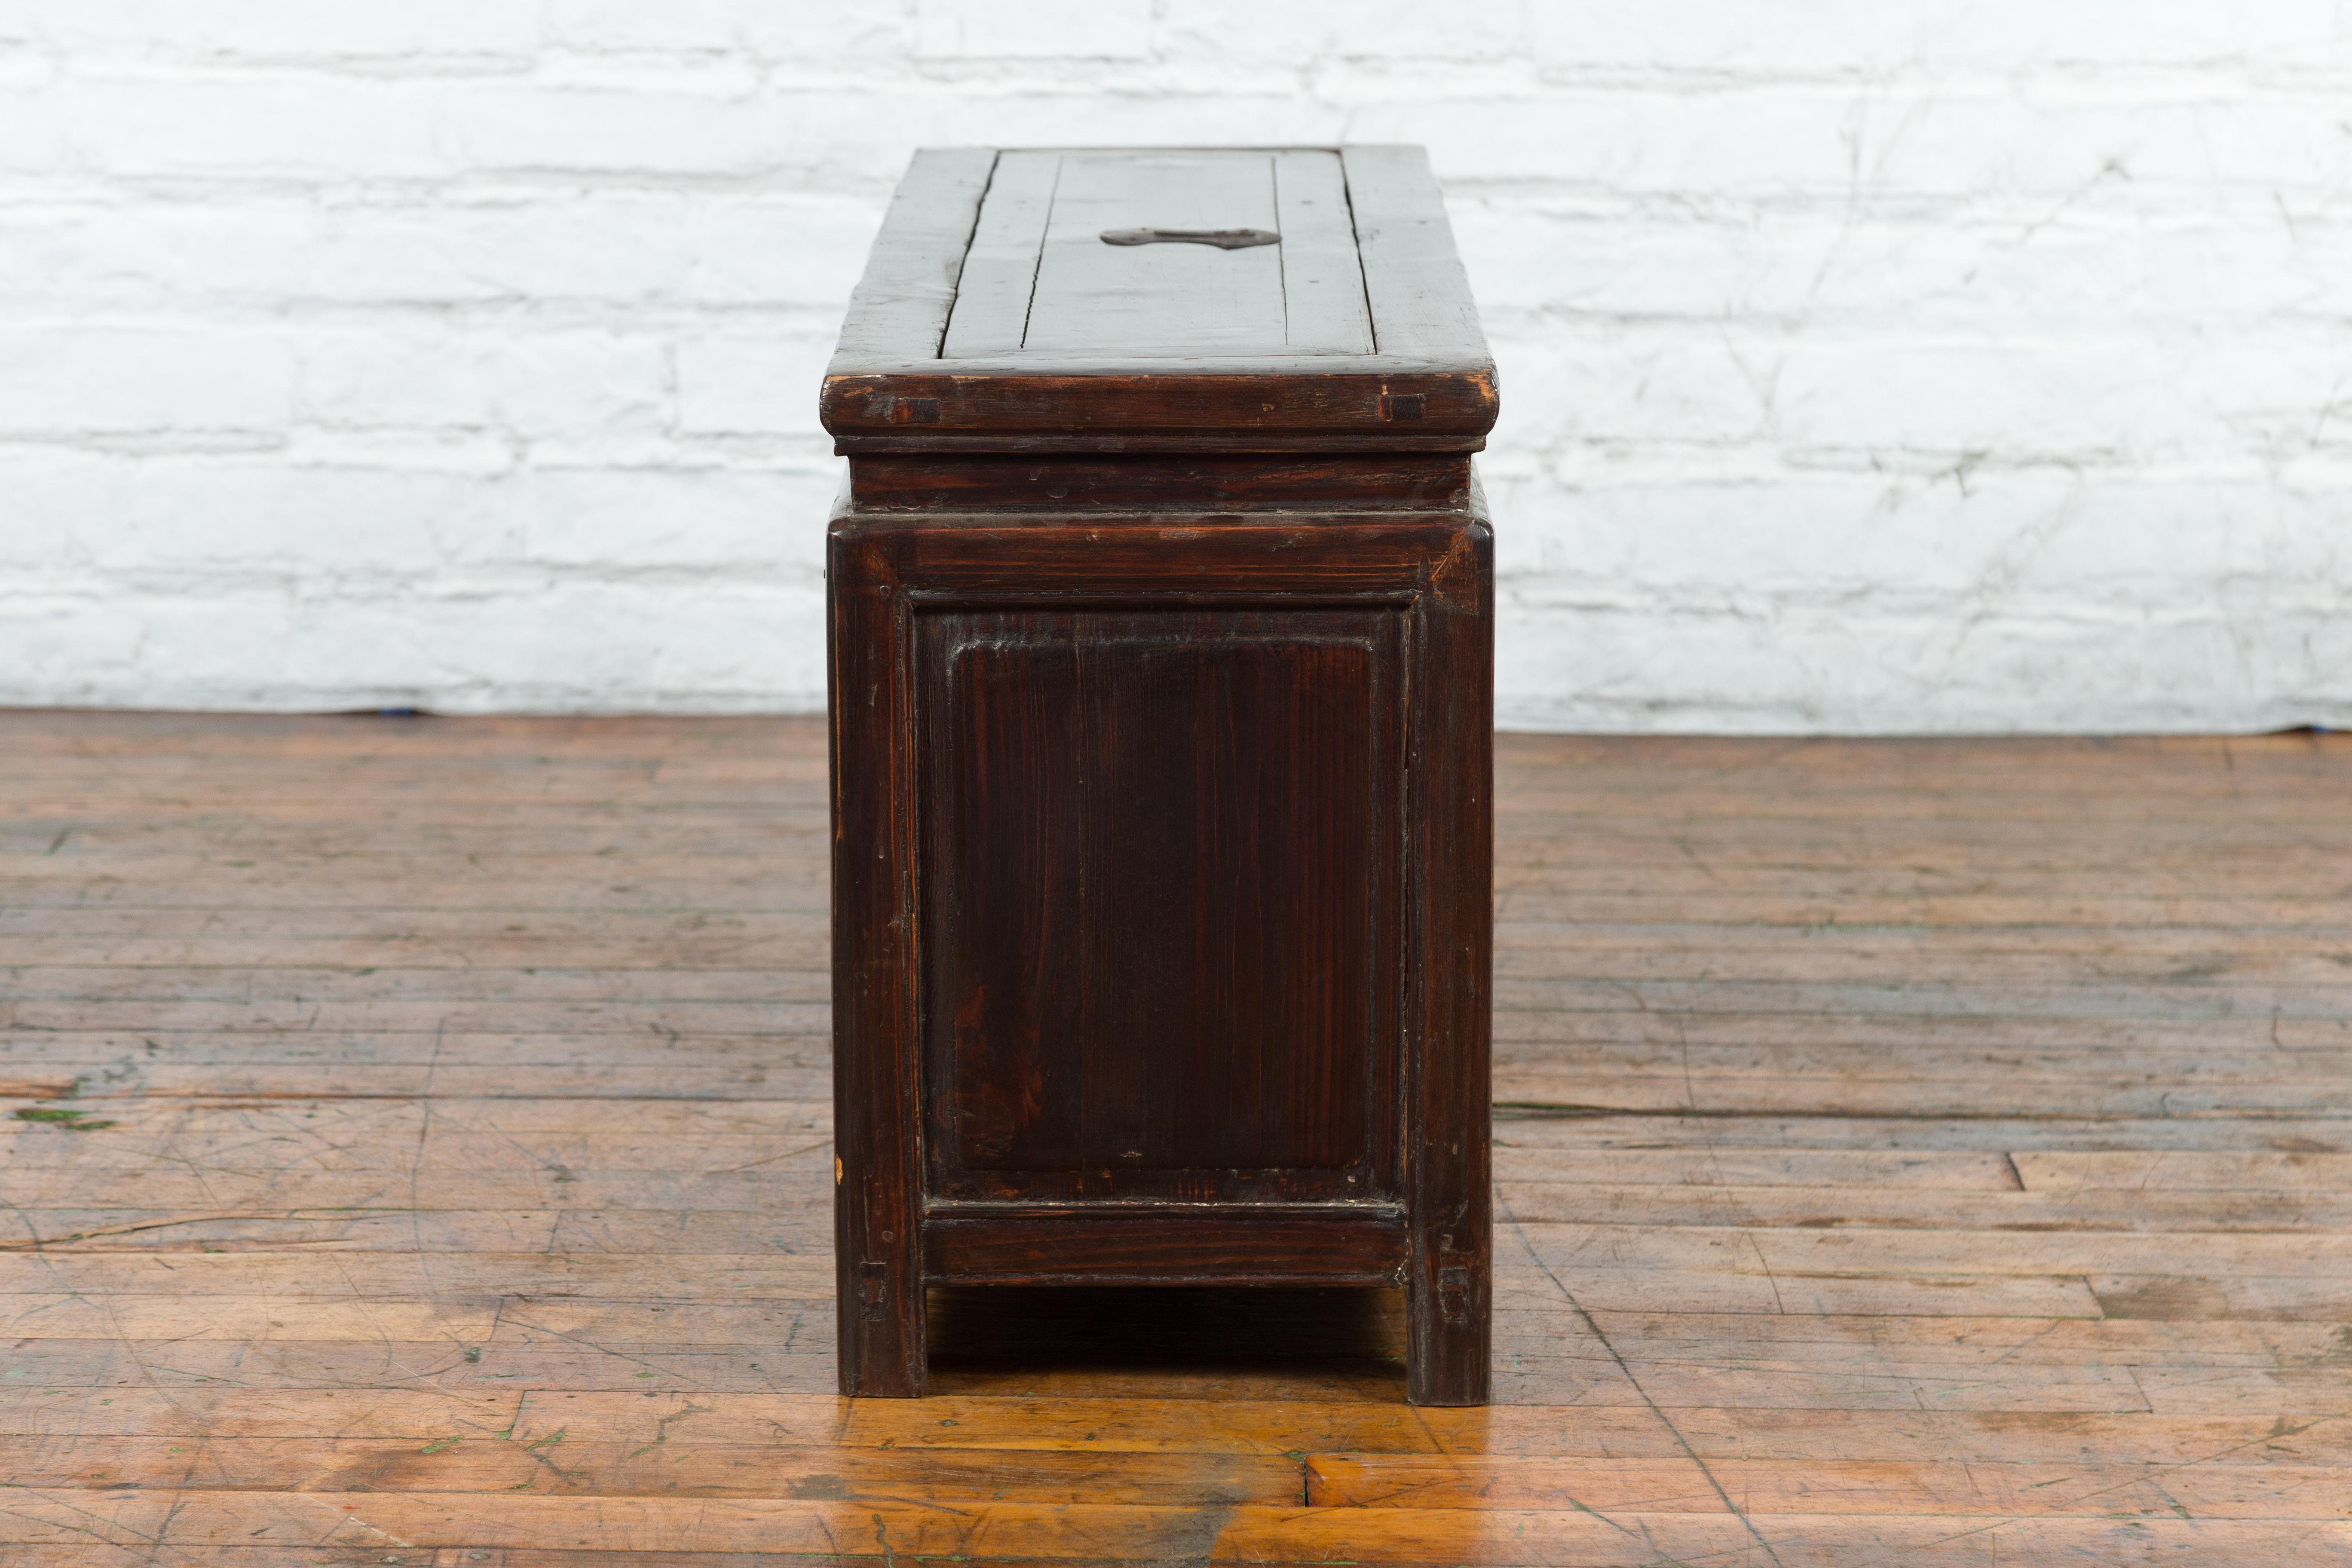 A Chinese lacquered wood trunk from the early 20th century, with brass hardware and removable top. Created in China during the early years of the 20th century, this trunk is covered with an elegant dark brown lacquer. Featuring a waisted top that